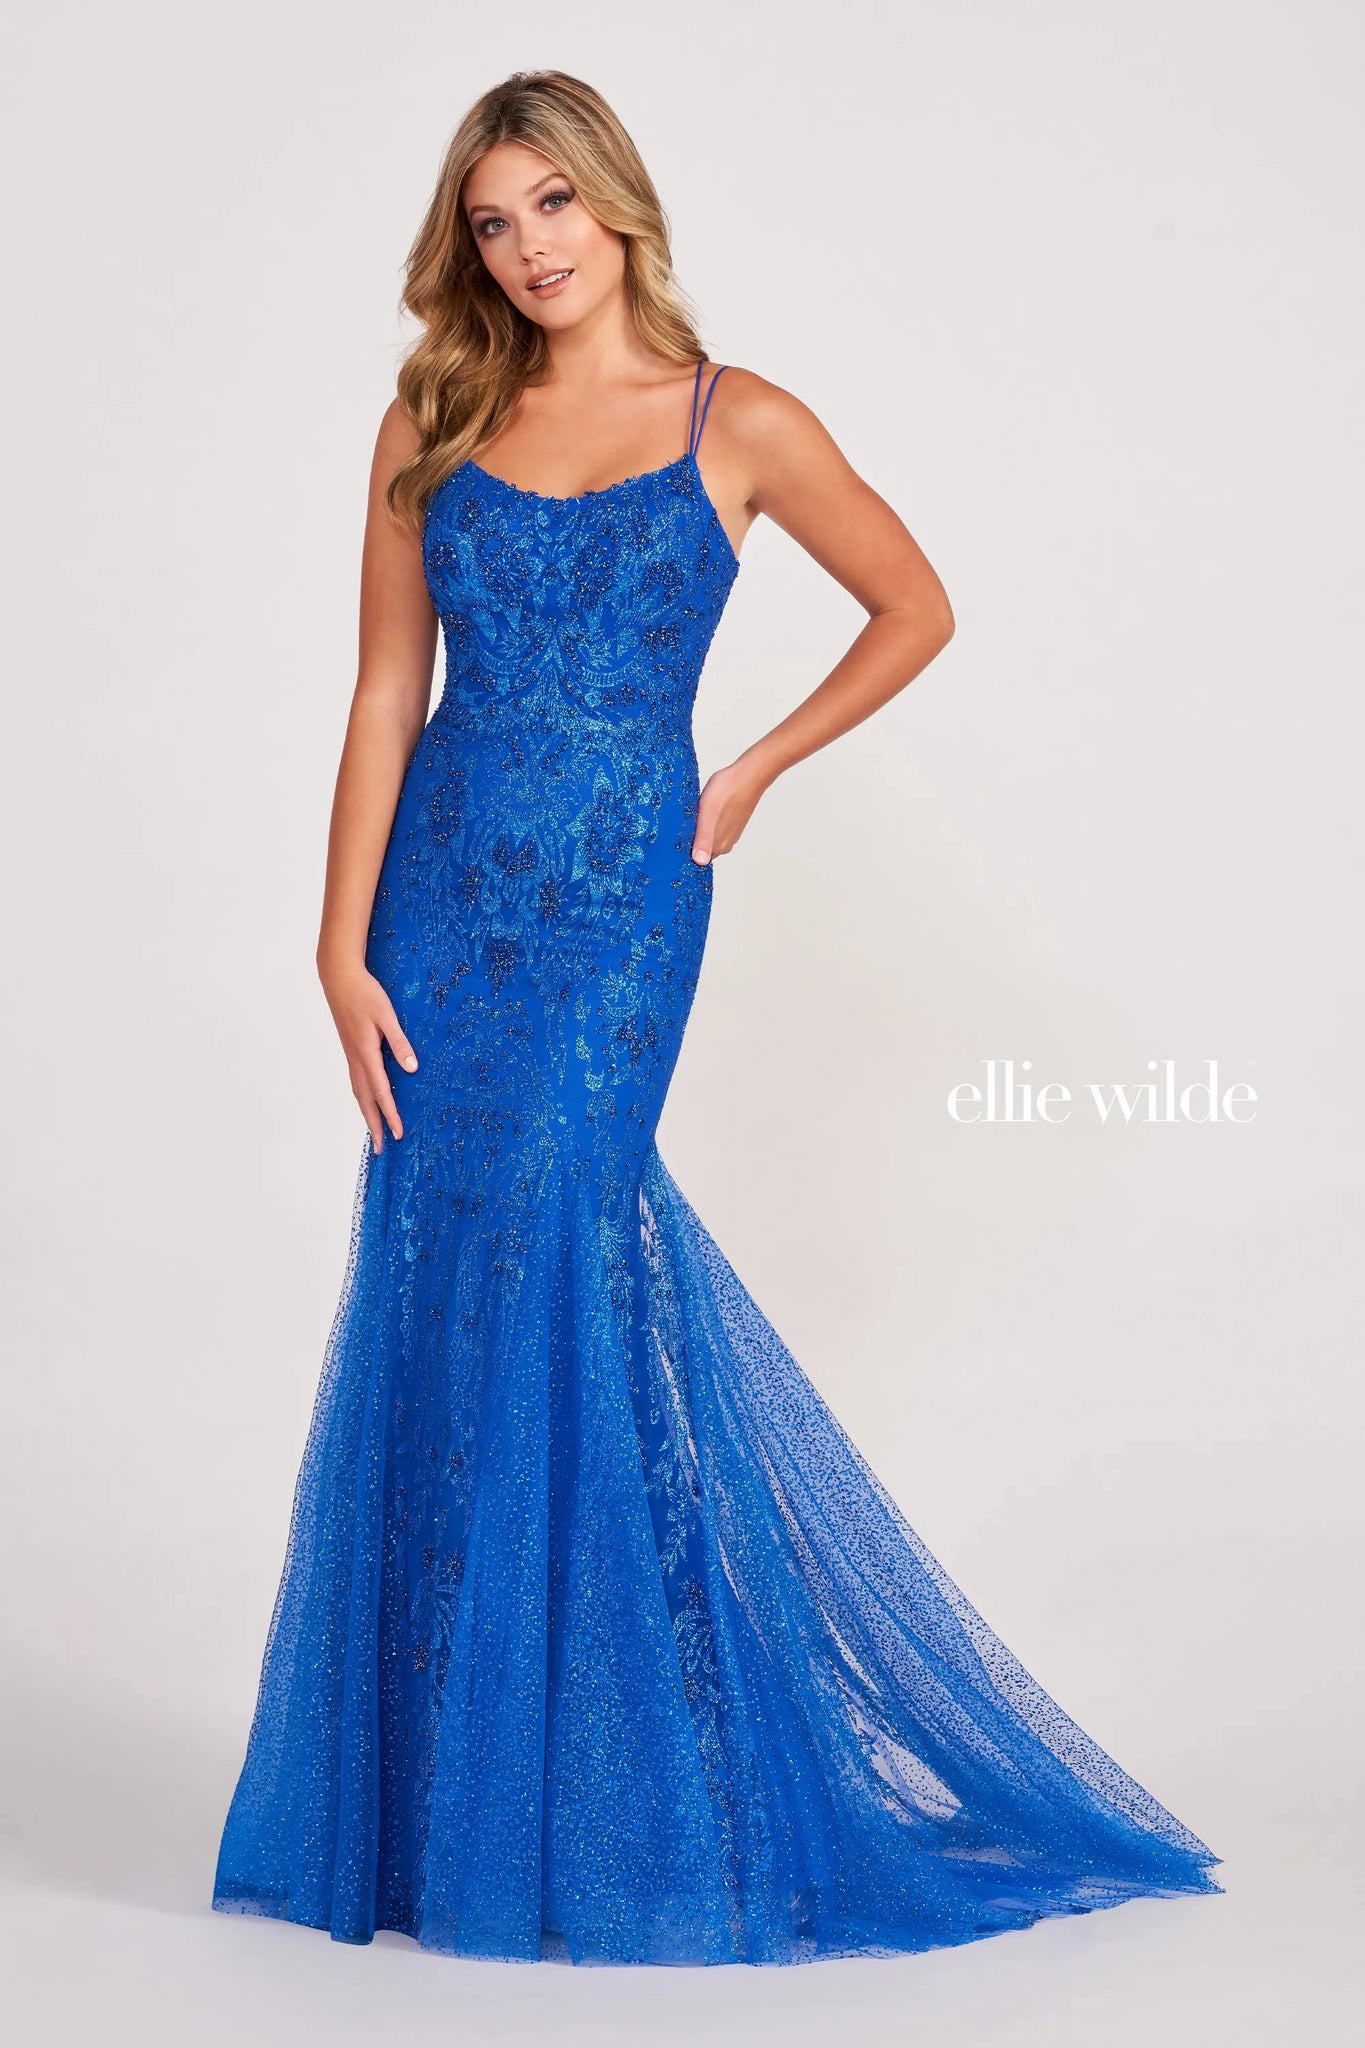 Have a fascinating night when making your entrance in the dazzling long style EW34045 by Ellie Wilde. Headlining the sparkling detailing that gorgeously decorates the entire gown to the very bottom of the beautiful flyaway train. Showcasing the fit and flare silhouette to hug you effortlessly in all the right places.